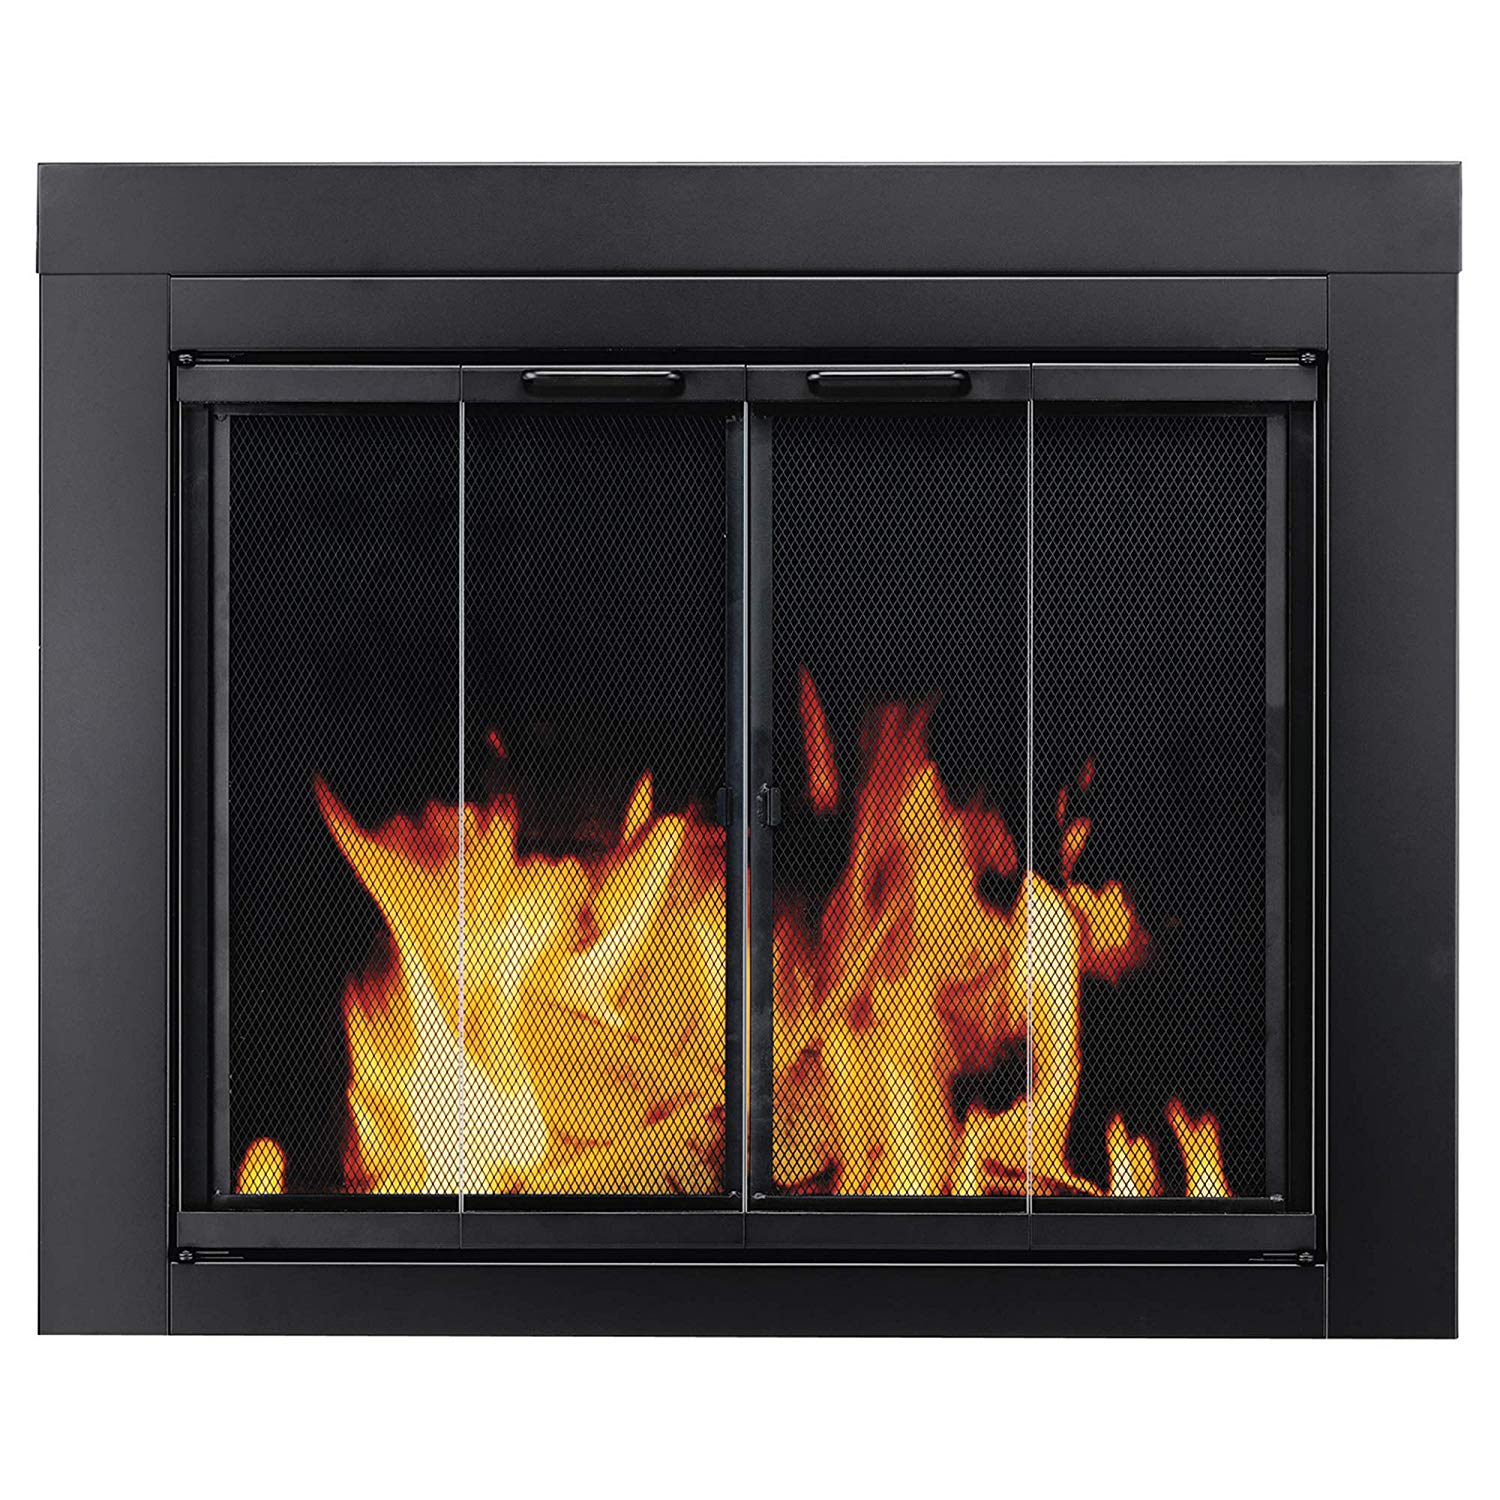 Fireplaces R Us Elegant Pleasant Hearth at 1000 ascot Fireplace Glass Door Black Small